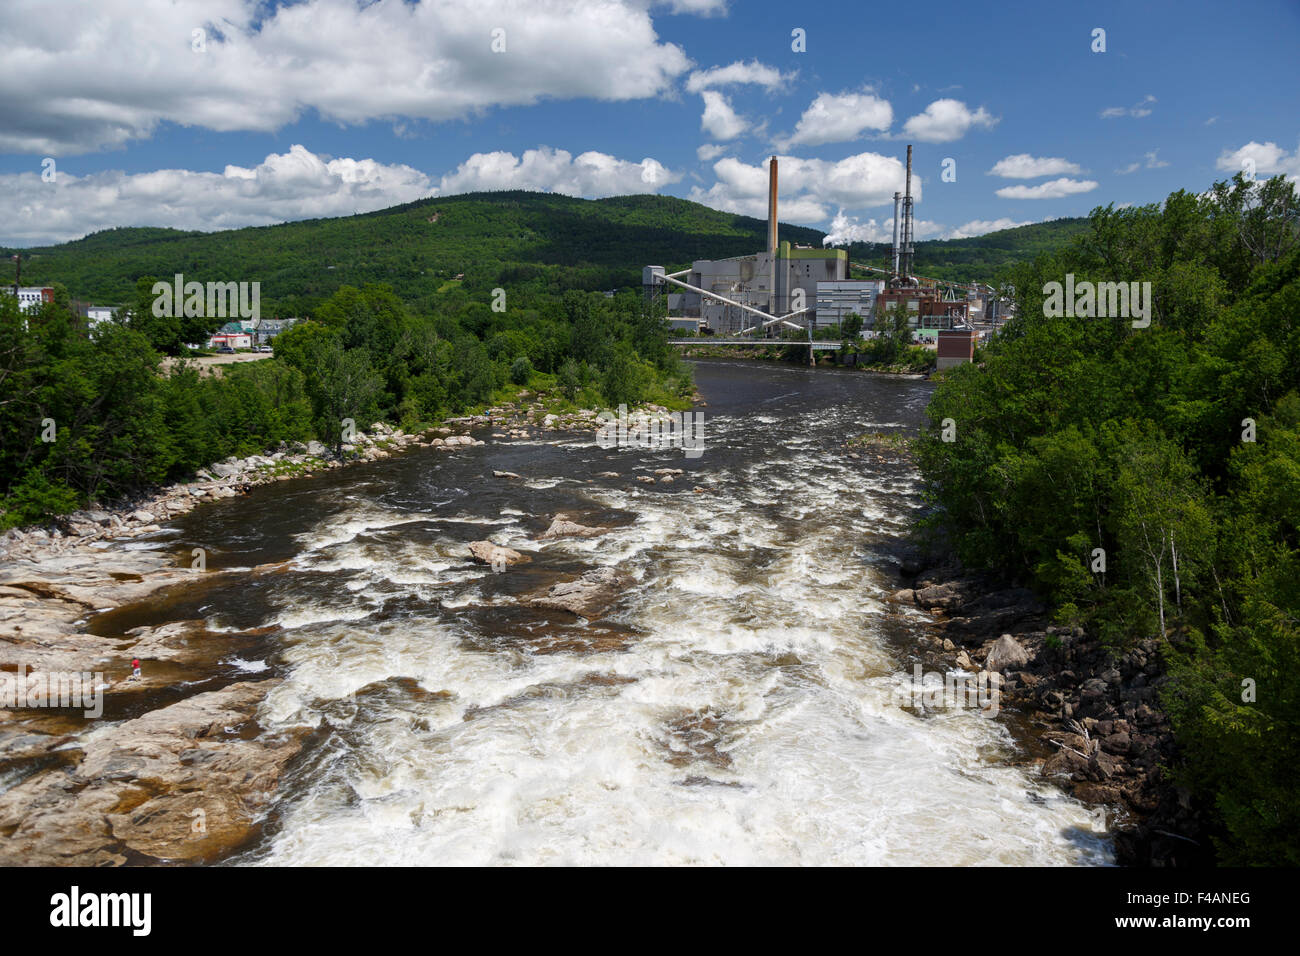 Rumford pulp mill and paper mill situated on the Androscoggin River seen from a bridge over the river. Maine June 2015 Stock Photo